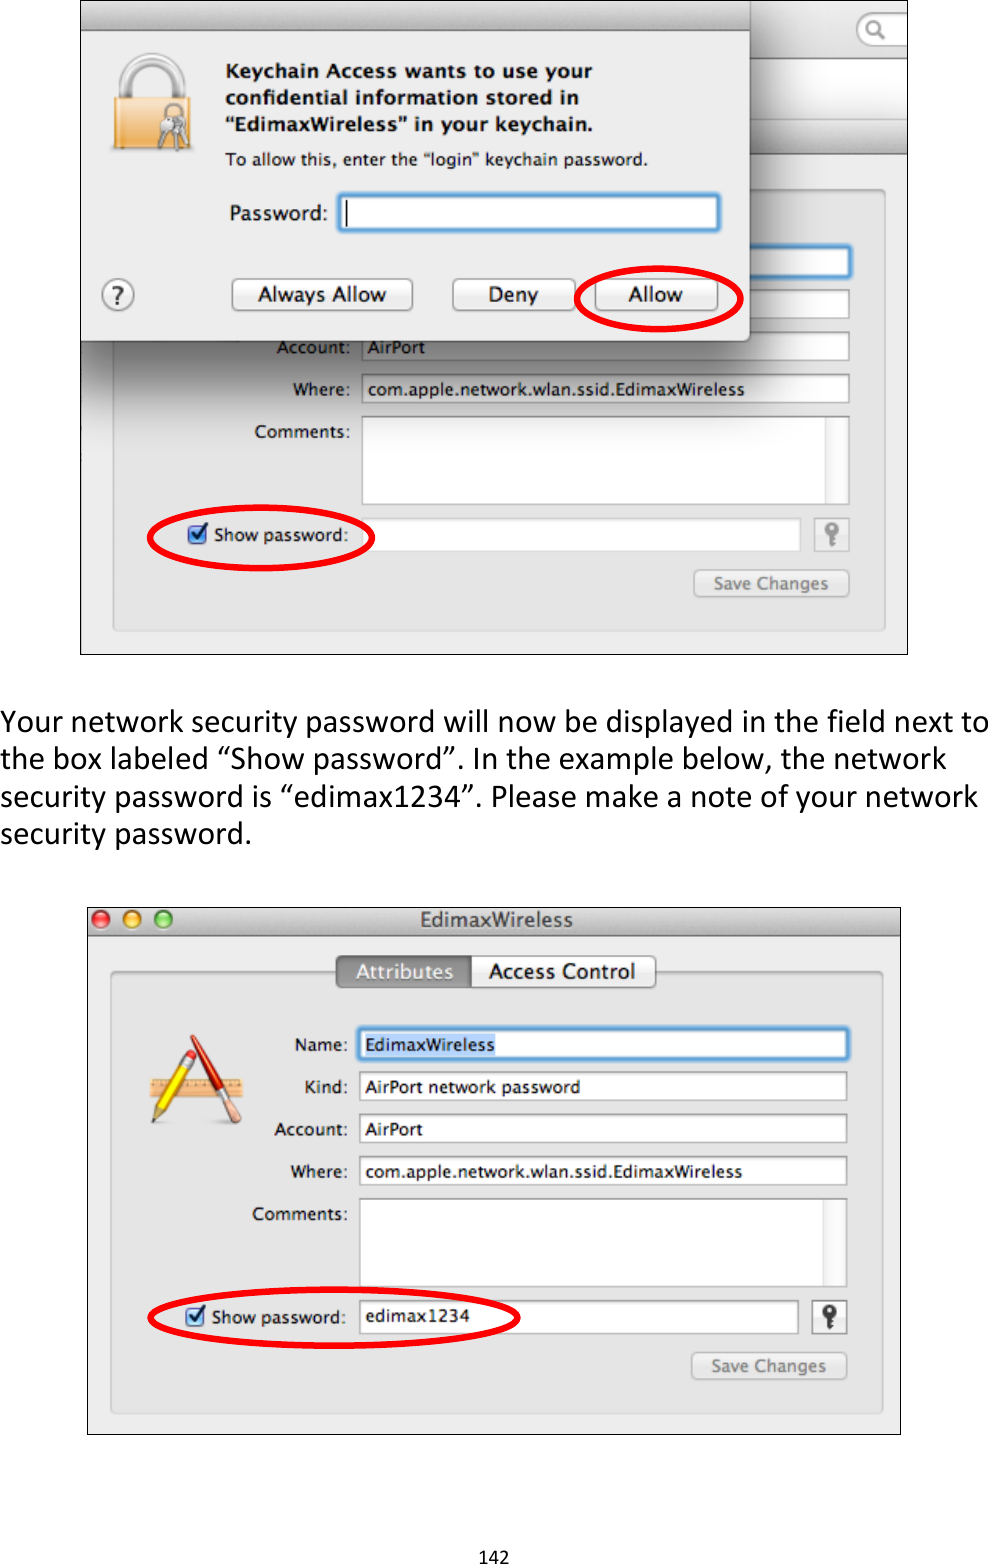 142    Your network security password will now be displayed in the field next to the box labeled “Show password”. In the example below, the network security password is “edimax1234”. Please make a note of your network security password.    